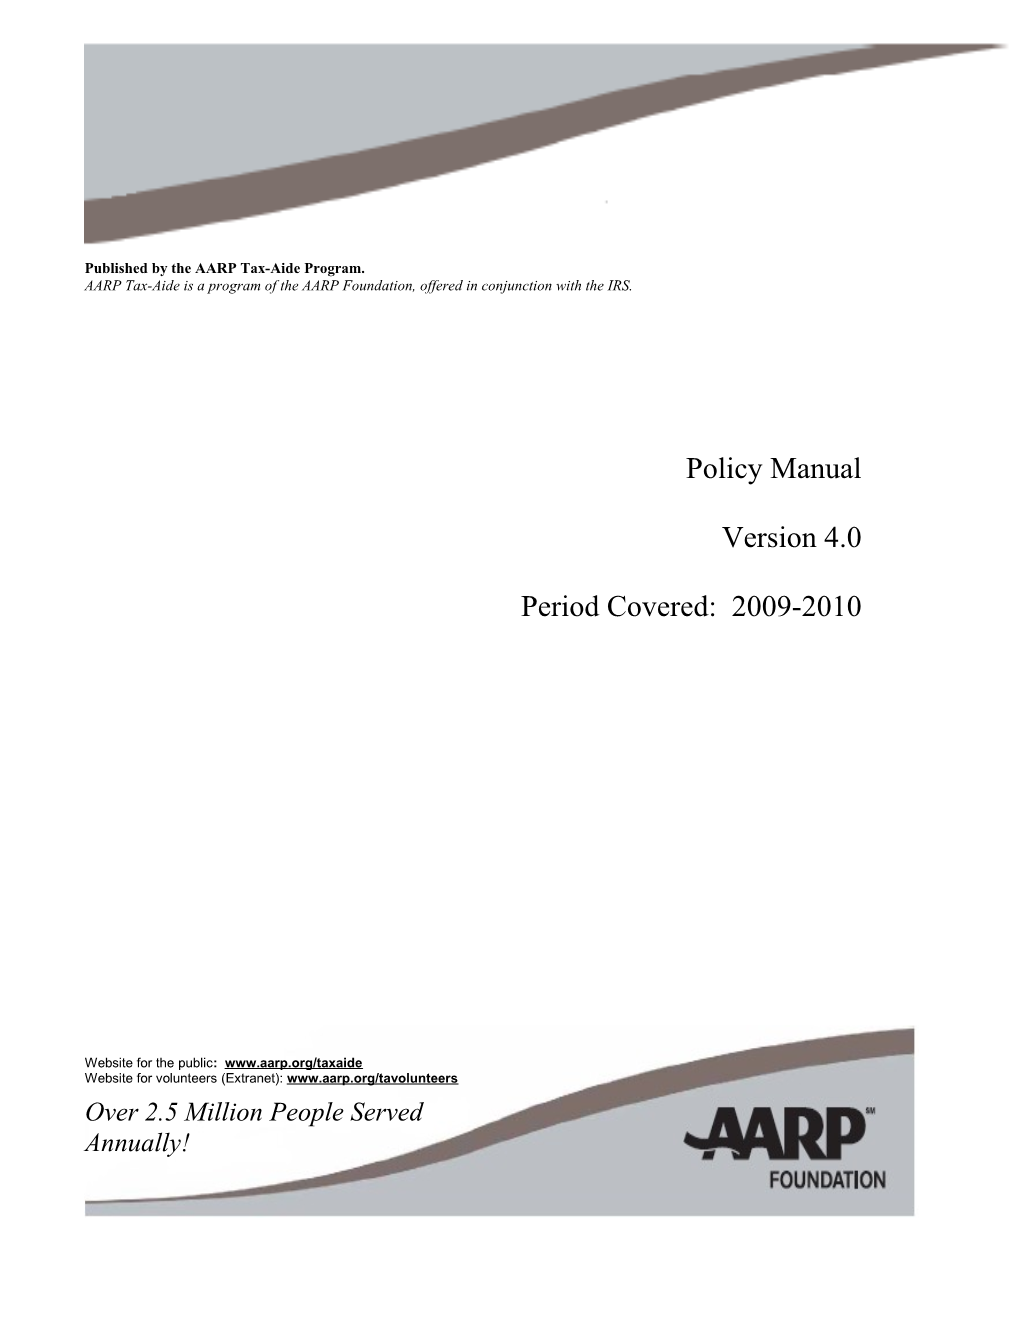 Policy Manual